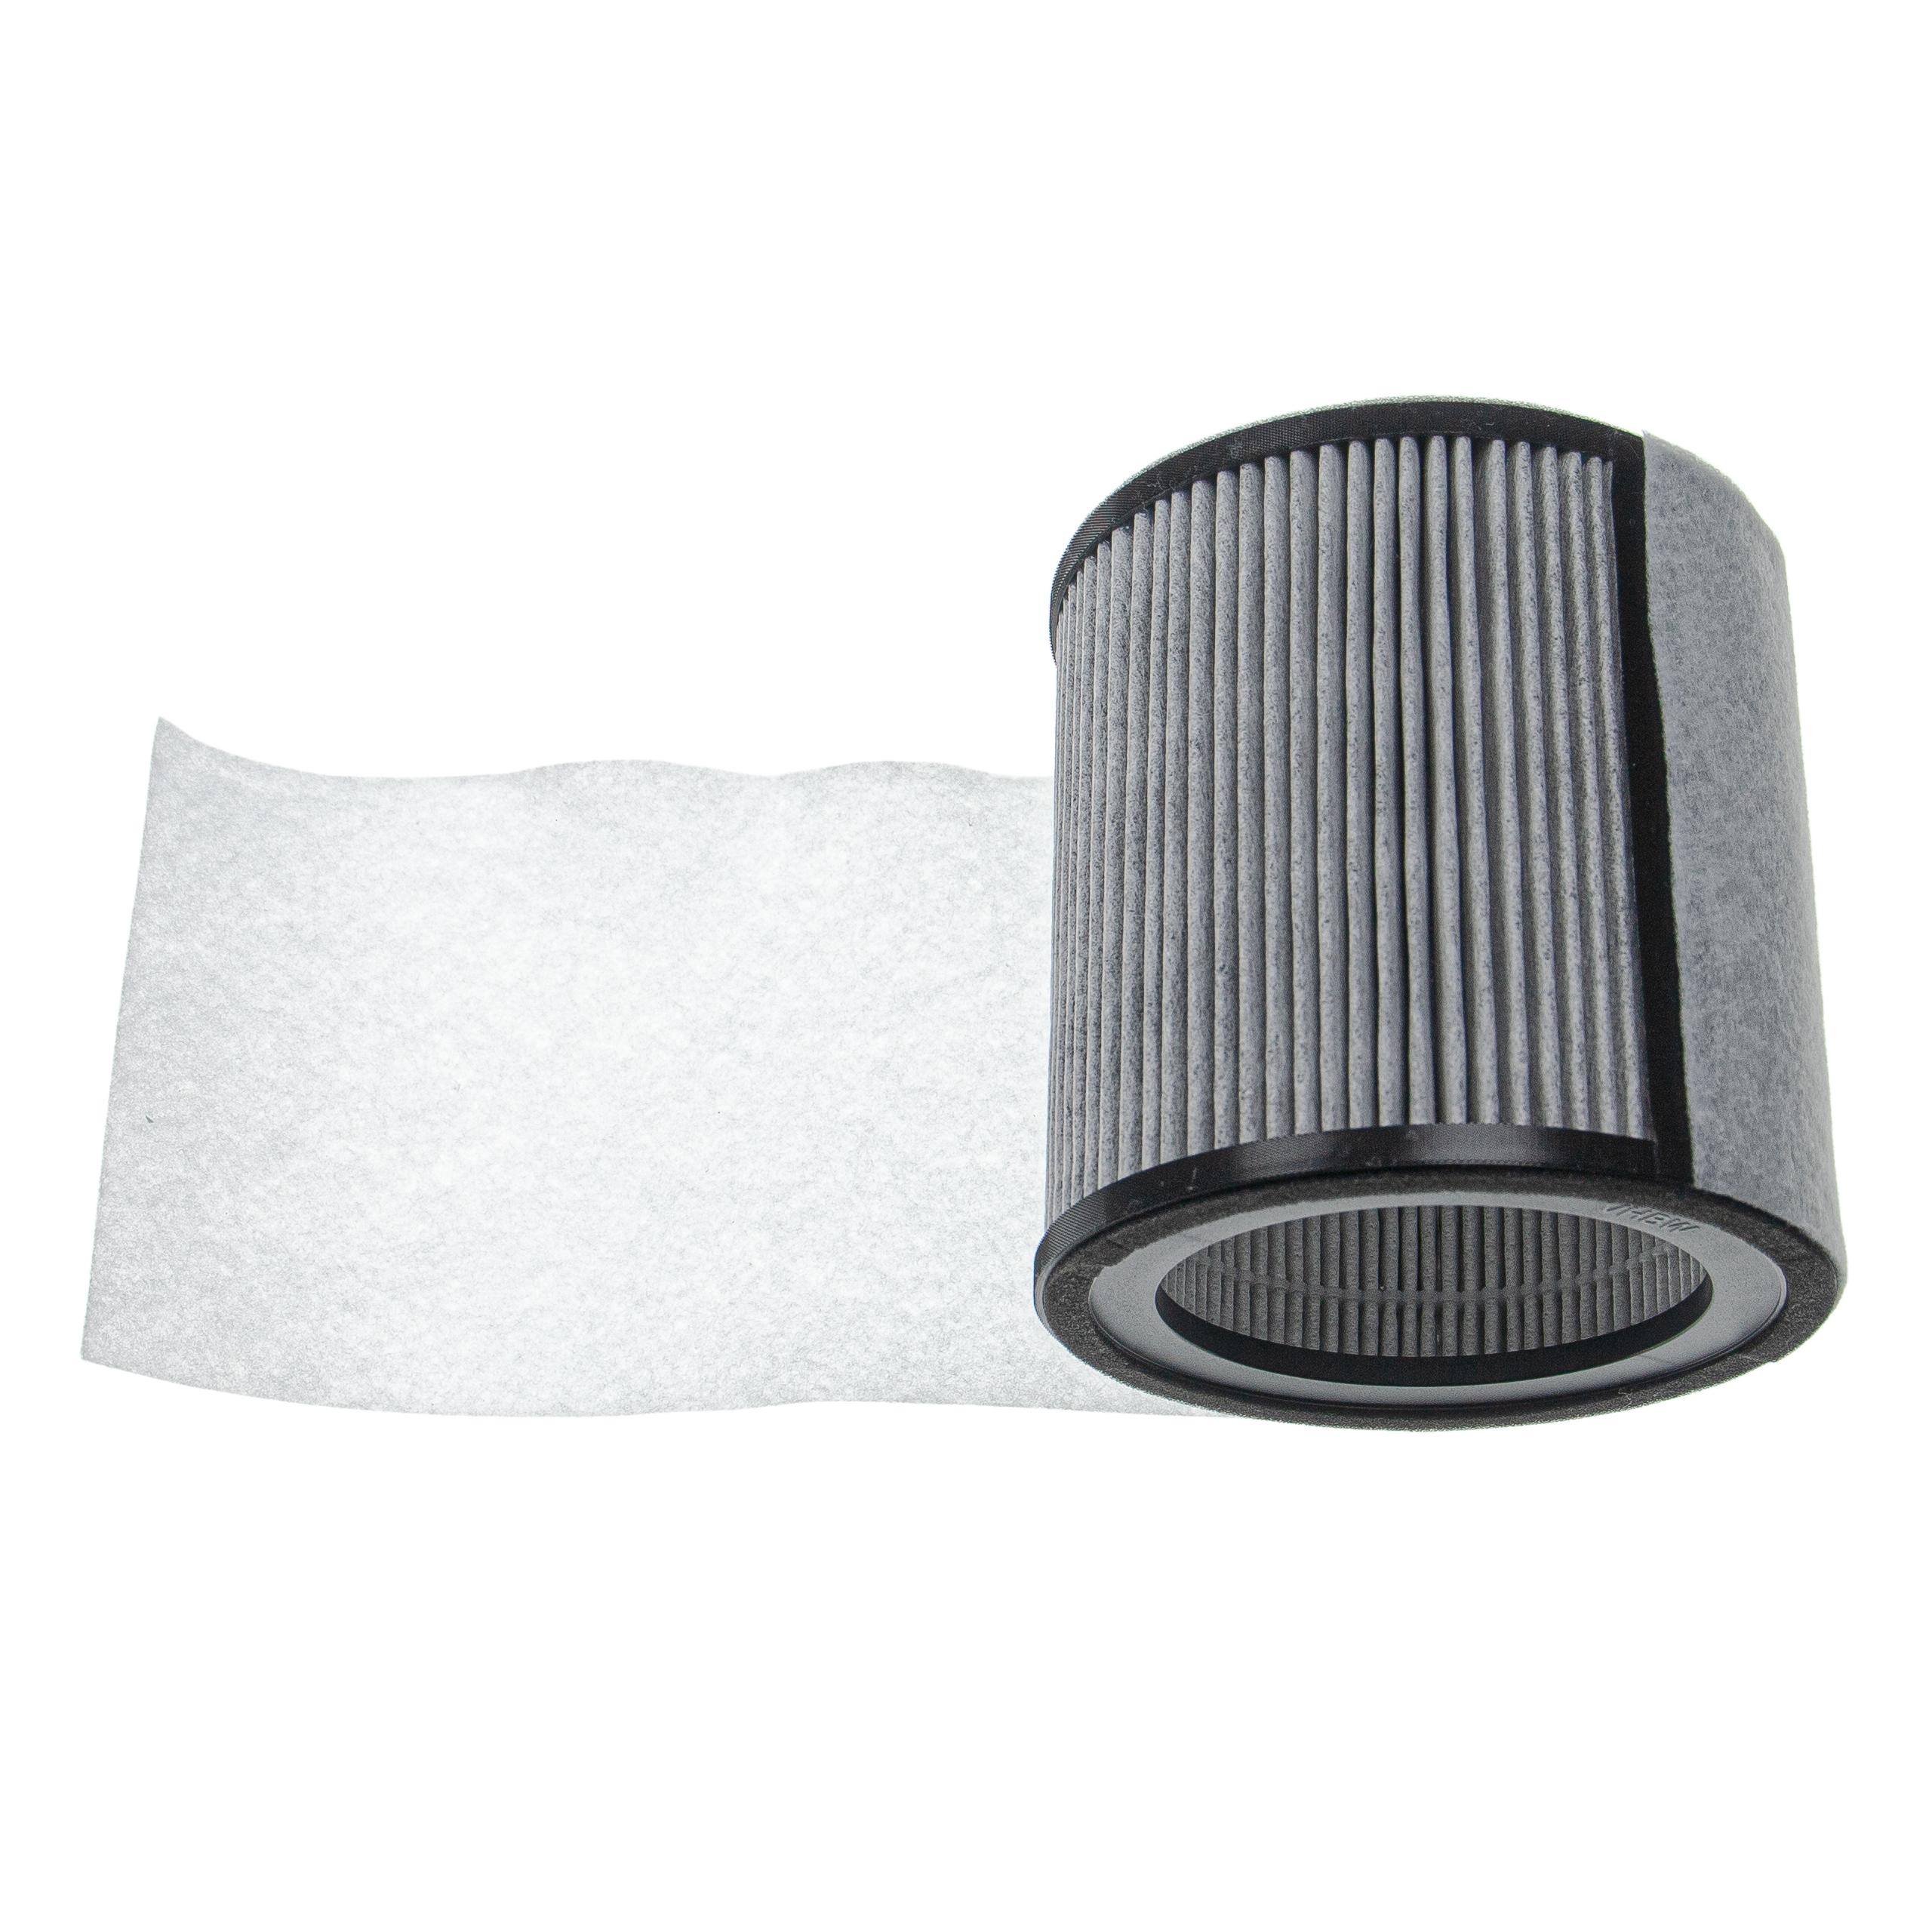 Filter replaces Leifheit / Soehnle 5028252599863, 68107 for Air Purifier etc.